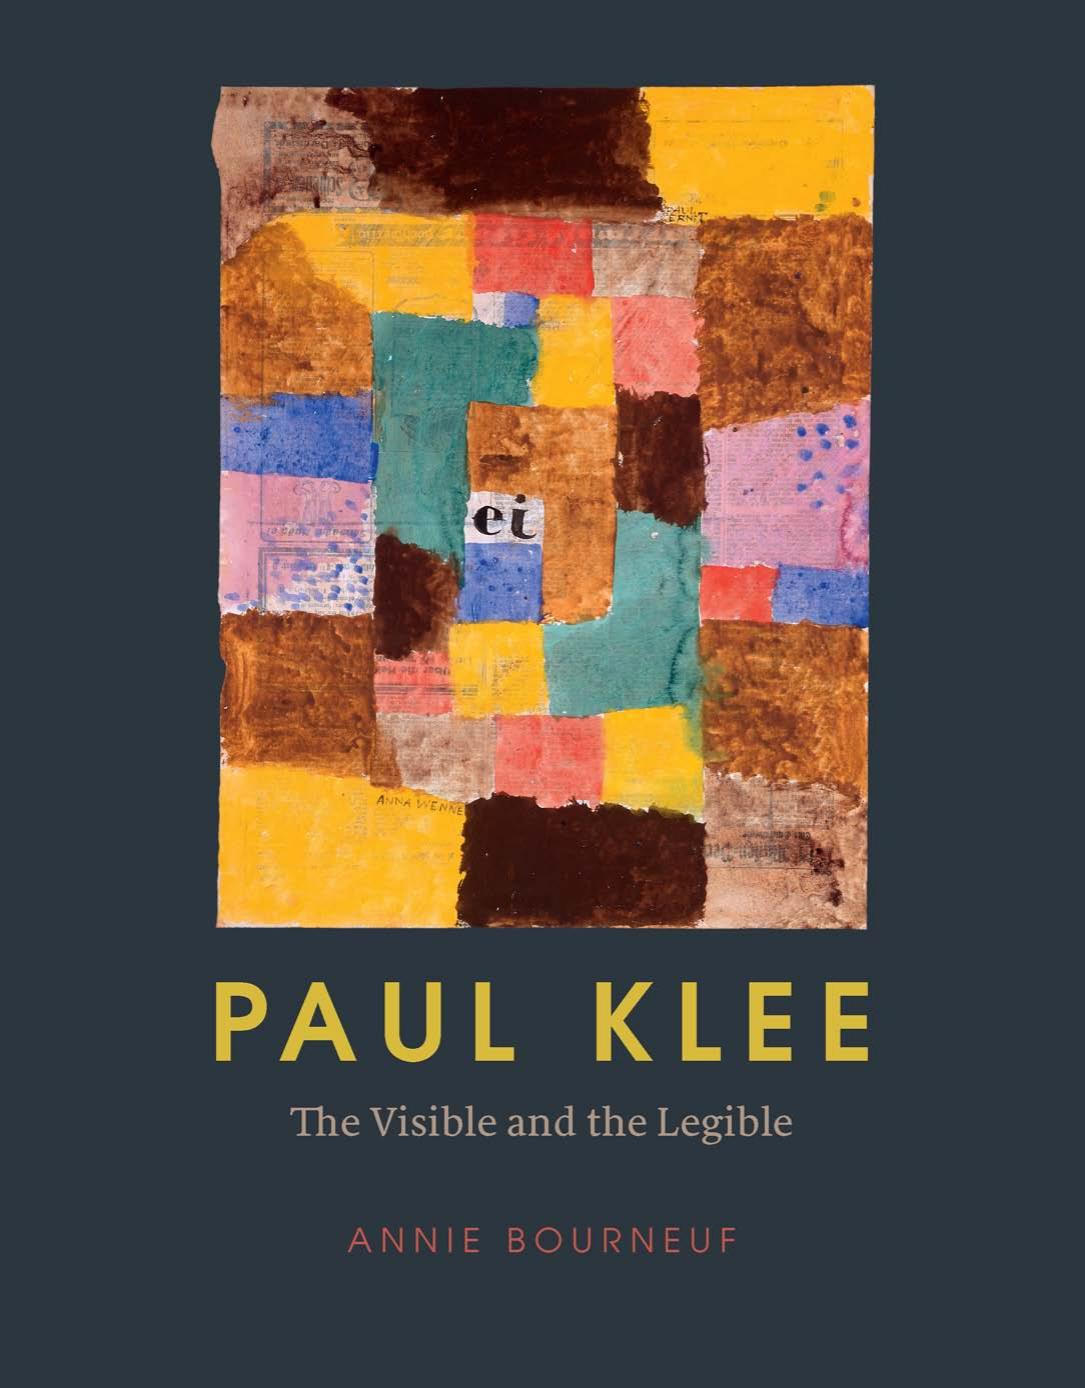 Paul Klee: The Visible and the Legible